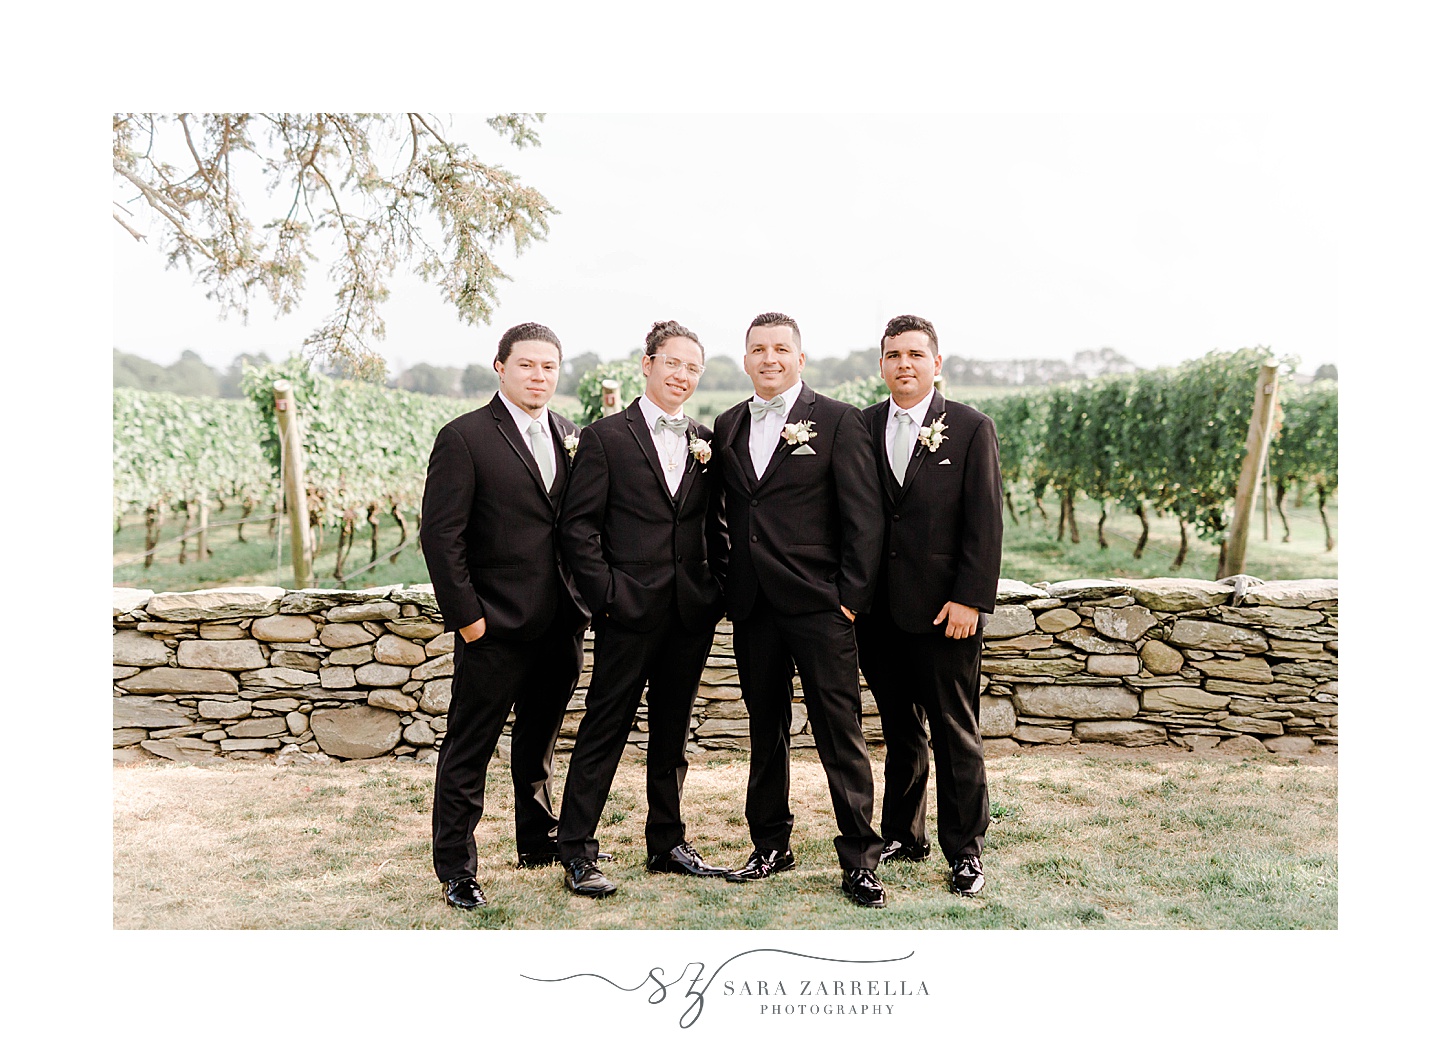 groom and groomsmen in classic black suits stand by stone wall